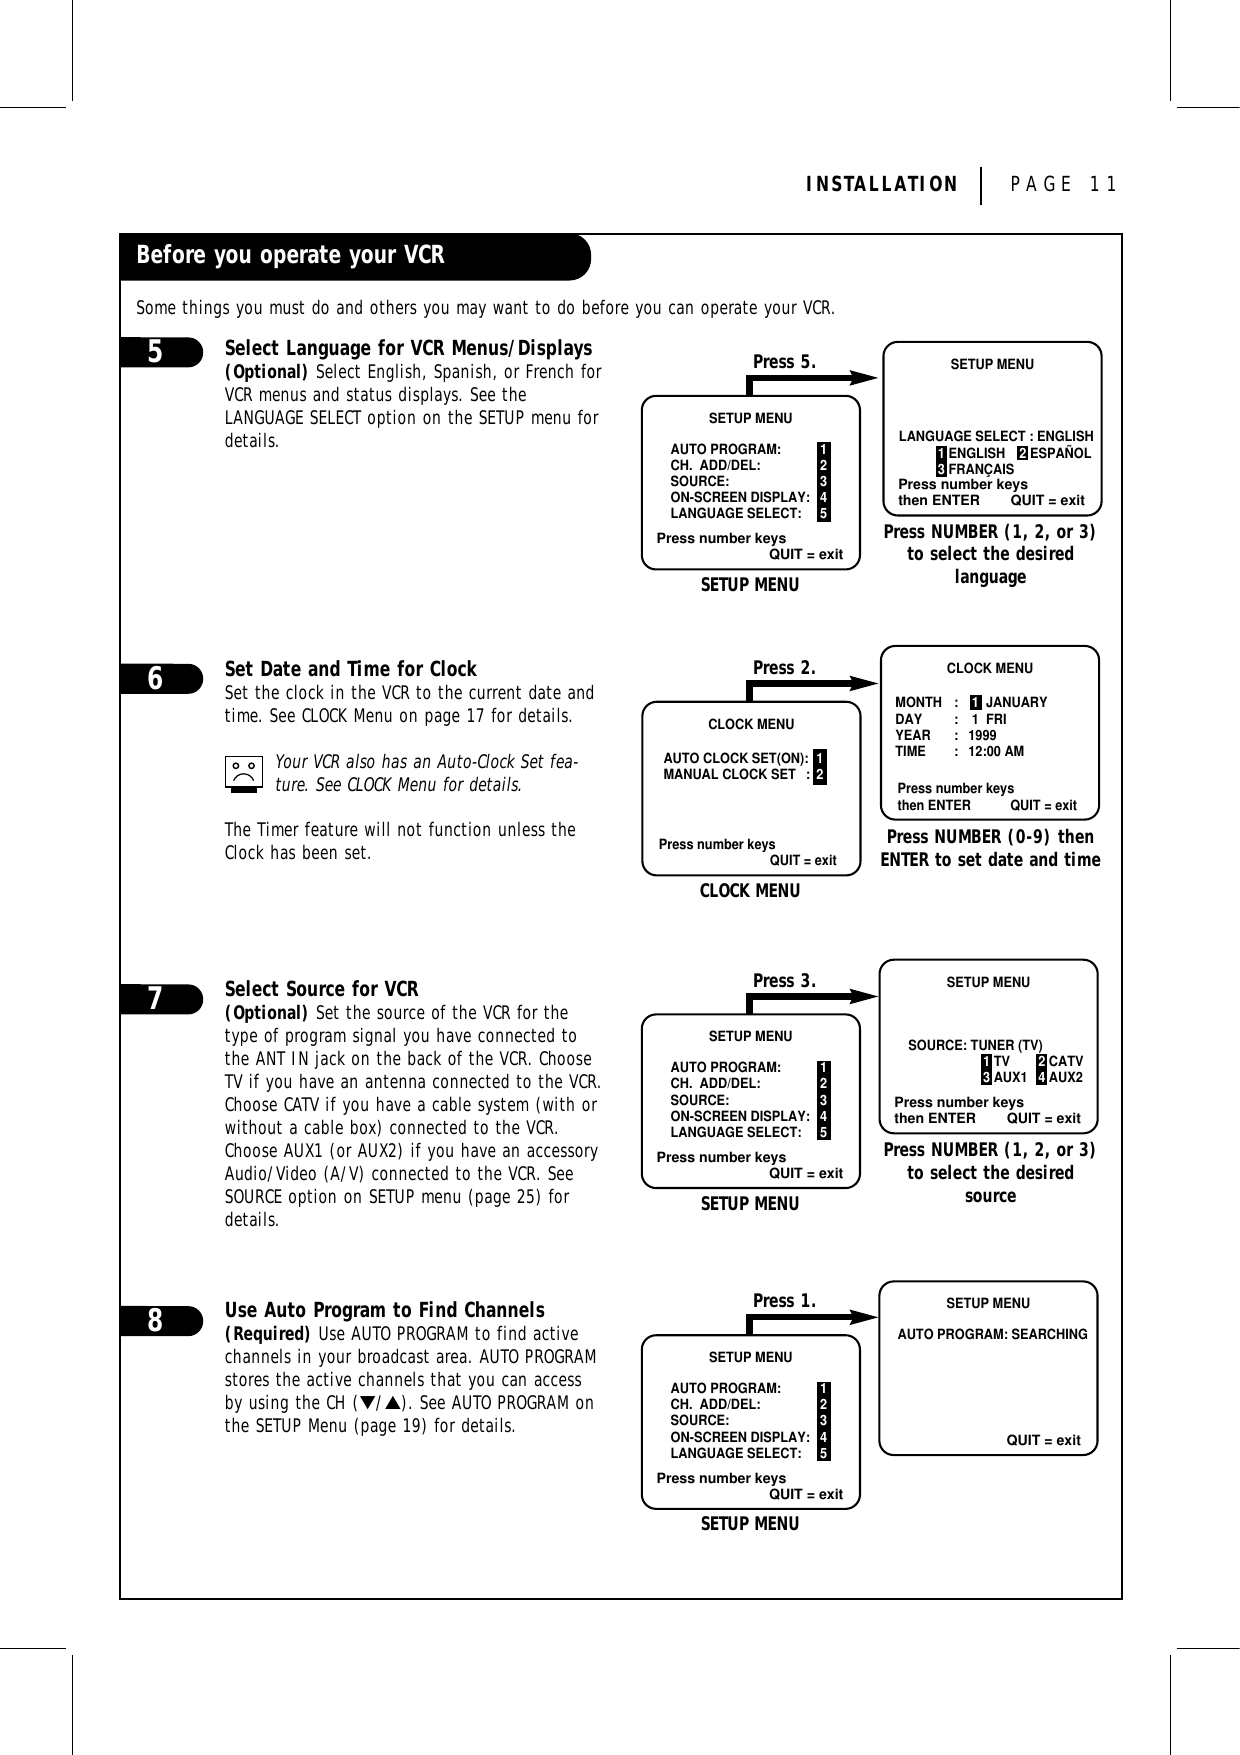 INSTALLATION PAGE 11Before you operate your VCRSome things you must do and others you may want to do before you can operate your VCR.Select Language for VCR Menus/Displays(Optional) Select English, Spanish, or French forVCR menus and status displays. See the LANGUAGE SELECT option on the SETUP menu fordetails.Set Date and Time for ClockSet the clock in the VCR to the current date andtime. See CLOCK Menu on page 17 for details.Your VCR also has an Auto-Clock Set fea-ture. See CLOCK Menu for details.The Timer feature will not function unless theClock has been set.Select Source for VCR(Optional) Set the source of the VCR for thetype of program signal you have connected tothe ANT IN jack on the back of the VCR. ChooseTV if you have an antenna connected to the VCR.Choose CATV if you have a cable system (with orwithout a cable box) connected to the VCR.Choose AUX1 (or AUX2) if you have an accessoryAudio/Video (A/V) connected to the VCR. SeeSOURCE option on SETUP menu (page 25) fordetails.Use Auto Program to Find Channels(Required) Use AUTO PROGRAM to find activechannels in your broadcast area. AUTO PROGRAMstores the active channels that you can accessby using the CH (▼/▲). See AUTO PROGRAM onthe SETUP Menu (page 19) for details.6785CLOCK MENUAUTO CLOCK SET(ON): 1MANUAL CLOCK SET : 2Press number keysQUIT = exitCLOCK MENUMONTH :  1  JANUARYDAY :  1  FRIYEAR : 1999TIME : 12:00 AMPress number keysthen ENTER QUIT = exitCLOCK MENUPress NUMBER (0-9) thenENTER to set date and timePress 2.Press number keysQUIT = exitSETUP MENUAUTO PROGRAM: 1CH.  ADD/DEL: 2SOURCE: 3ON-SCREEN DISPLAY: 4LANGUAGE SELECT: 5Press number keysthen ENTER QUIT = exitSETUP MENUSOURCE: TUNER (TV)1 TV 2 CATV3 AUX1 4 AUX2SETUP MENUPress NUMBER (1, 2, or 3)to select the desiredsourcePress 3.Press number keysQUIT = exitSETUP MENUAUTO PROGRAM: 1CH.  ADD/DEL: 2SOURCE: 3ON-SCREEN DISPLAY: 4LANGUAGE SELECT: 5QUIT = exitSETUP MENUAUTO PROGRAM: SEARCHINGSETUP MENUPress 1.Press number keysQUIT = exitSETUP MENUAUTO PROGRAM: 1CH.  ADD/DEL: 2SOURCE: 3ON-SCREEN DISPLAY: 4LANGUAGE SELECT: 5Press number keysthen ENTER QUIT = exitSETUP MENULANGUAGE SELECT : ENGLISH           1 ENGLISH    2 ESPAÑOL           3 FRANÇAISSETUP MENUPress NUMBER (1, 2, or 3)to select the desired languagePress 5.